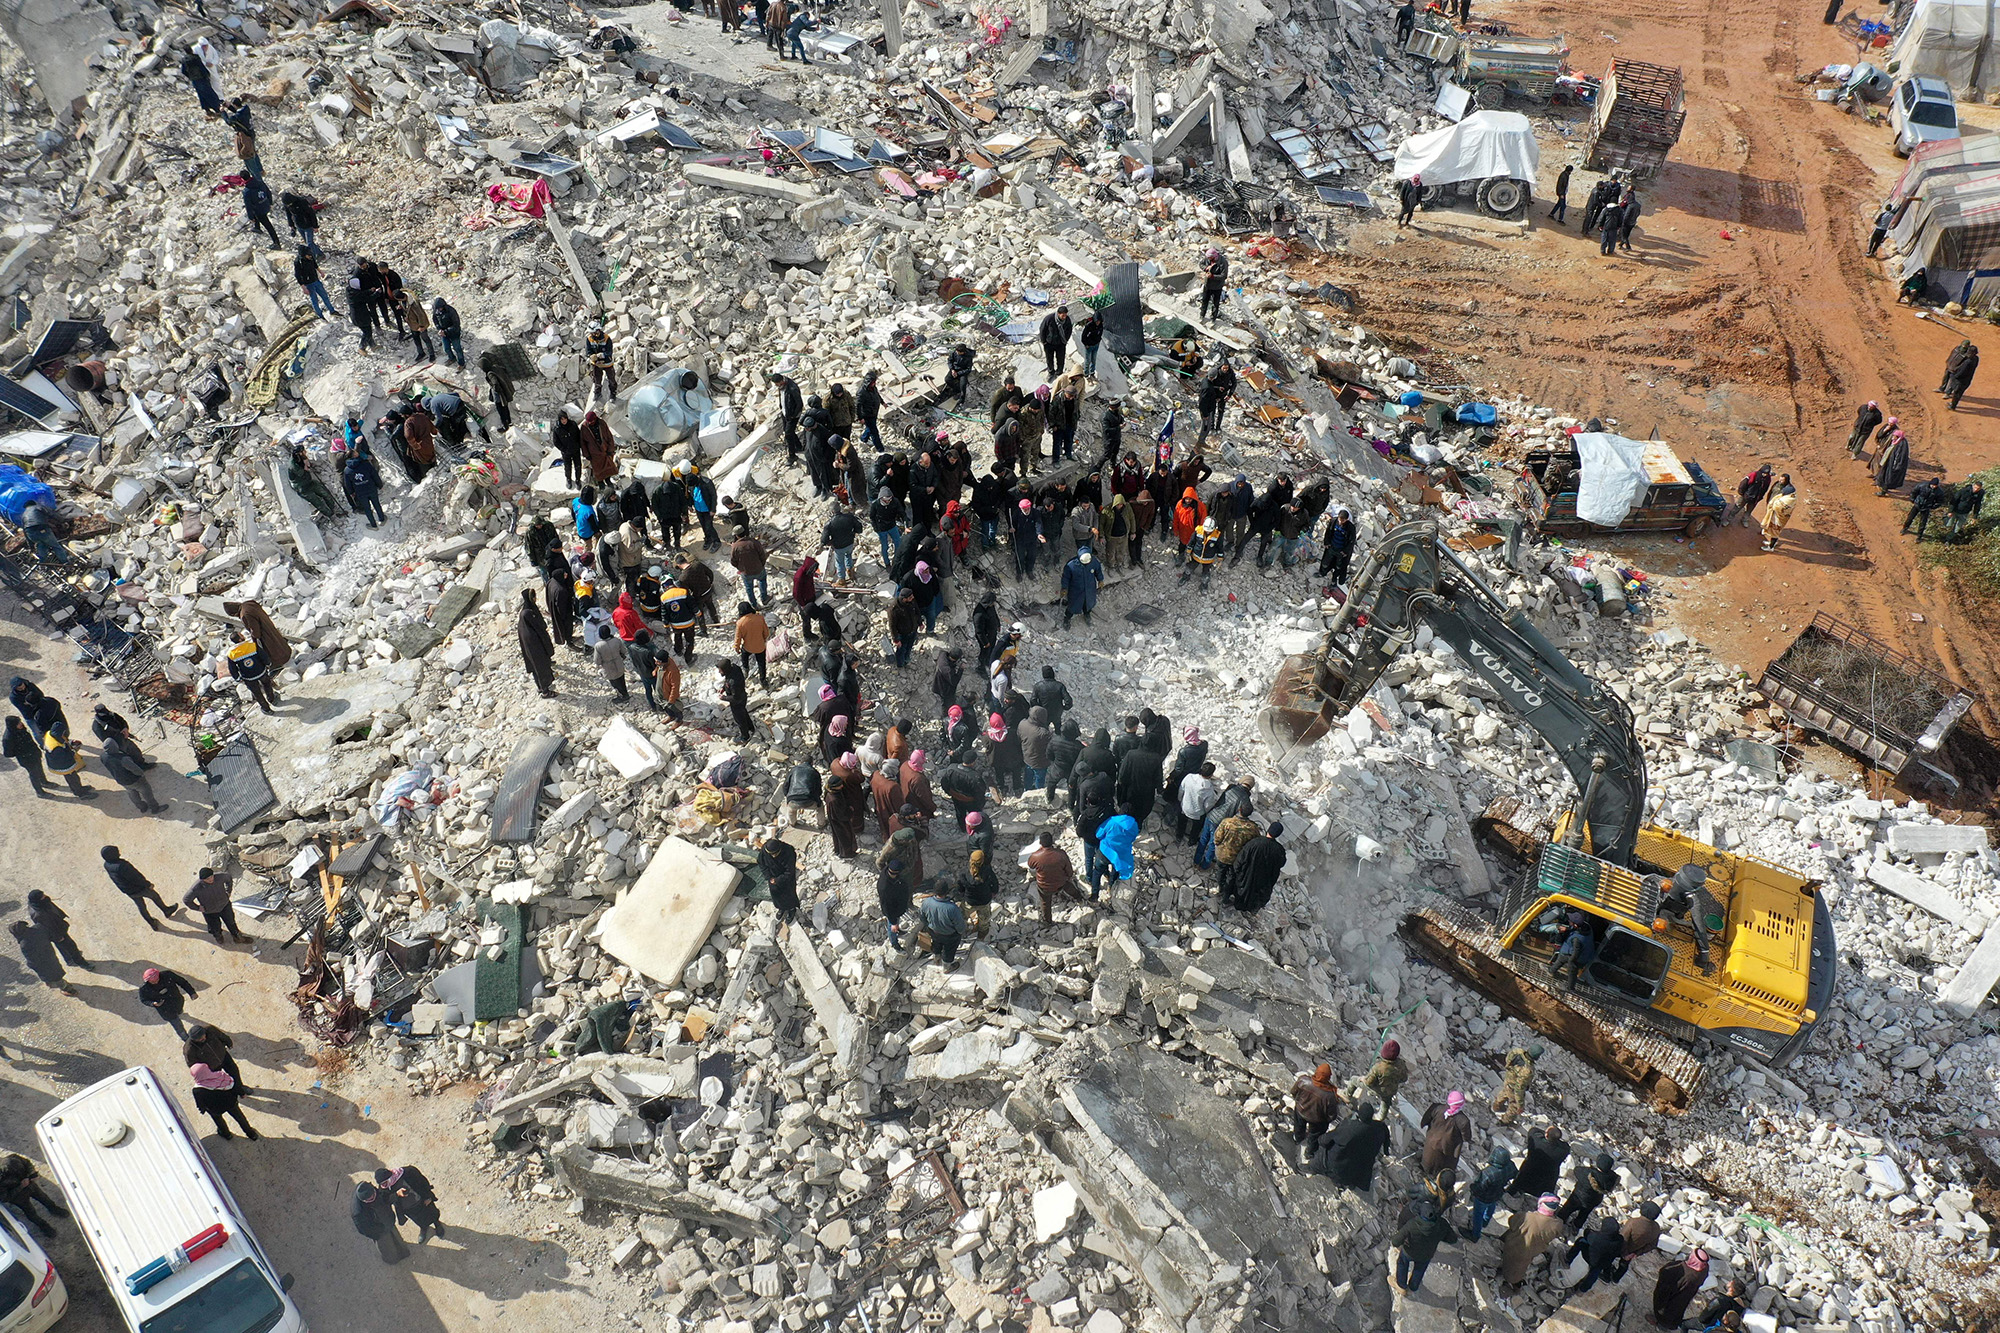 Residents searching for victims and survivors amidst the rubble of collapsed buildings following an earthquake in the village of Besnia, in Syria's Idlib province, on February 6.